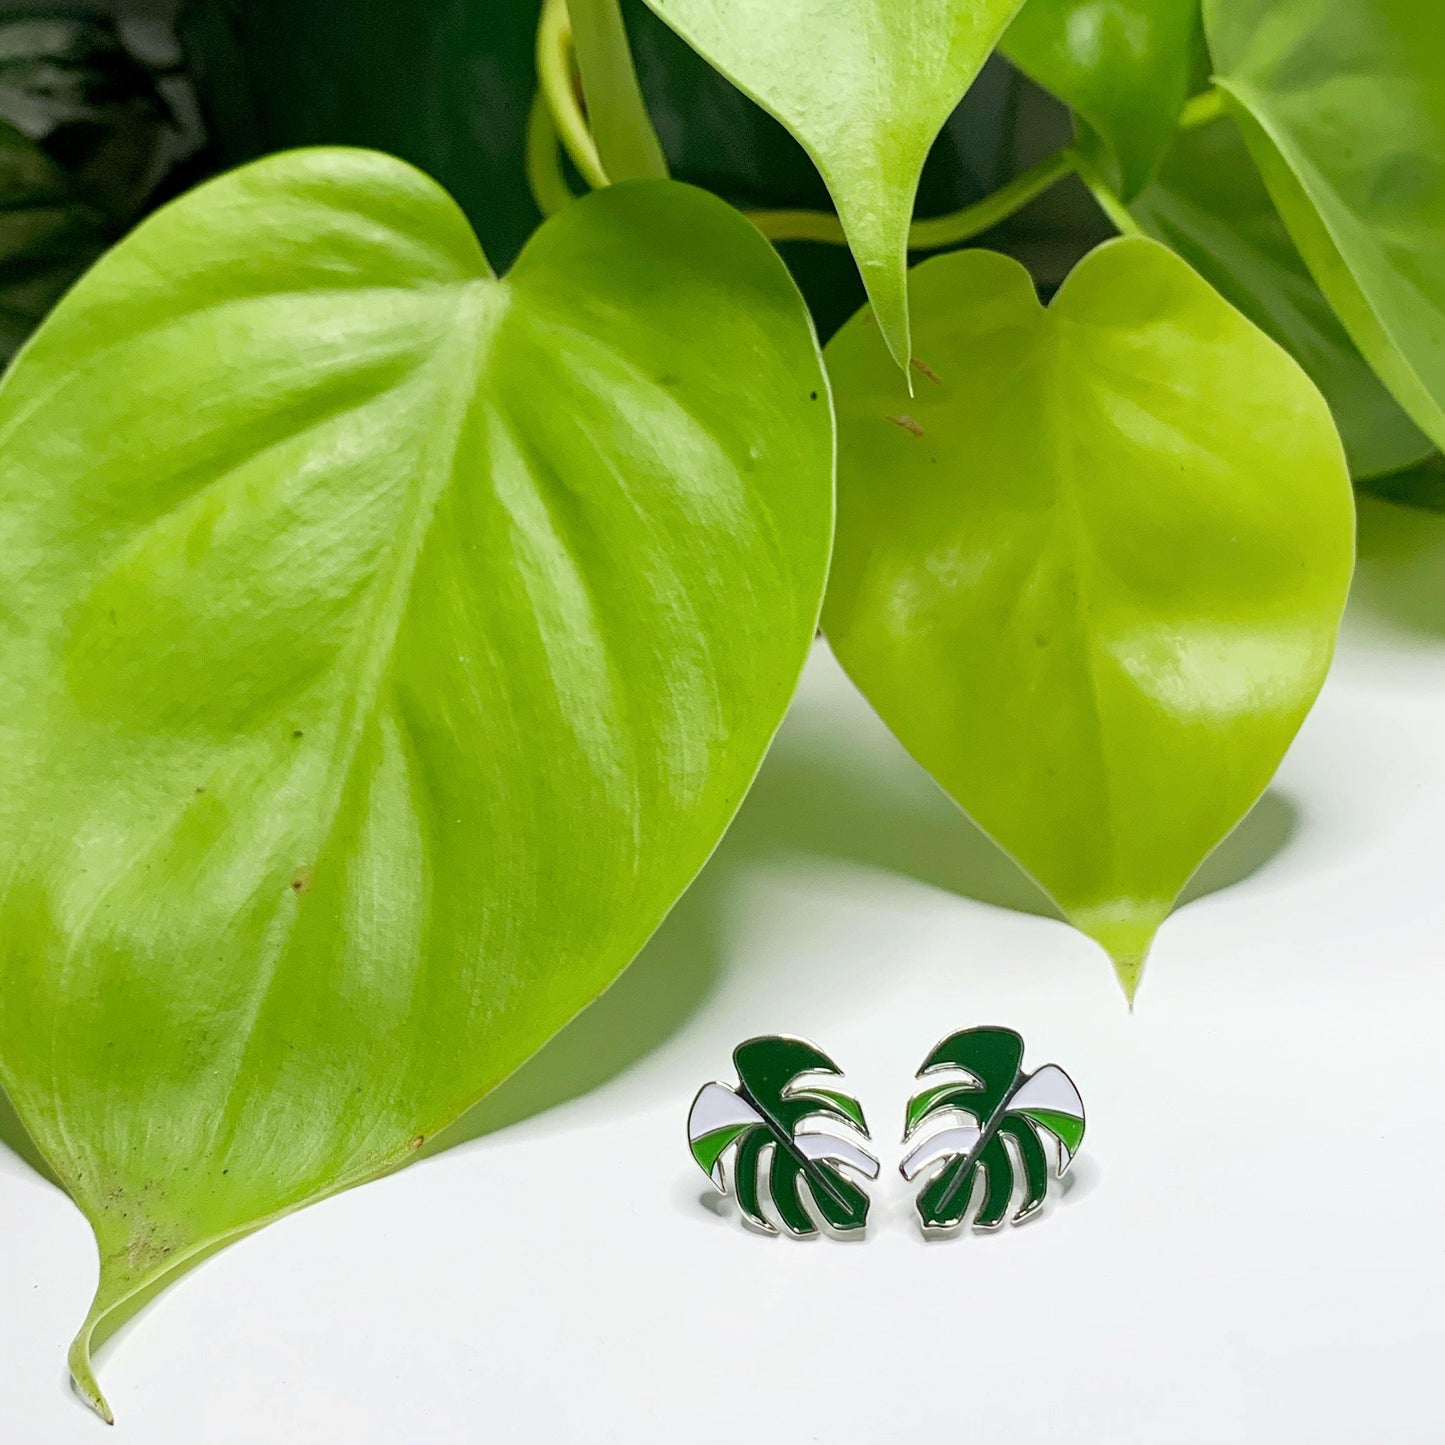 Variegated Monstera Earrings - Luxe Foliage